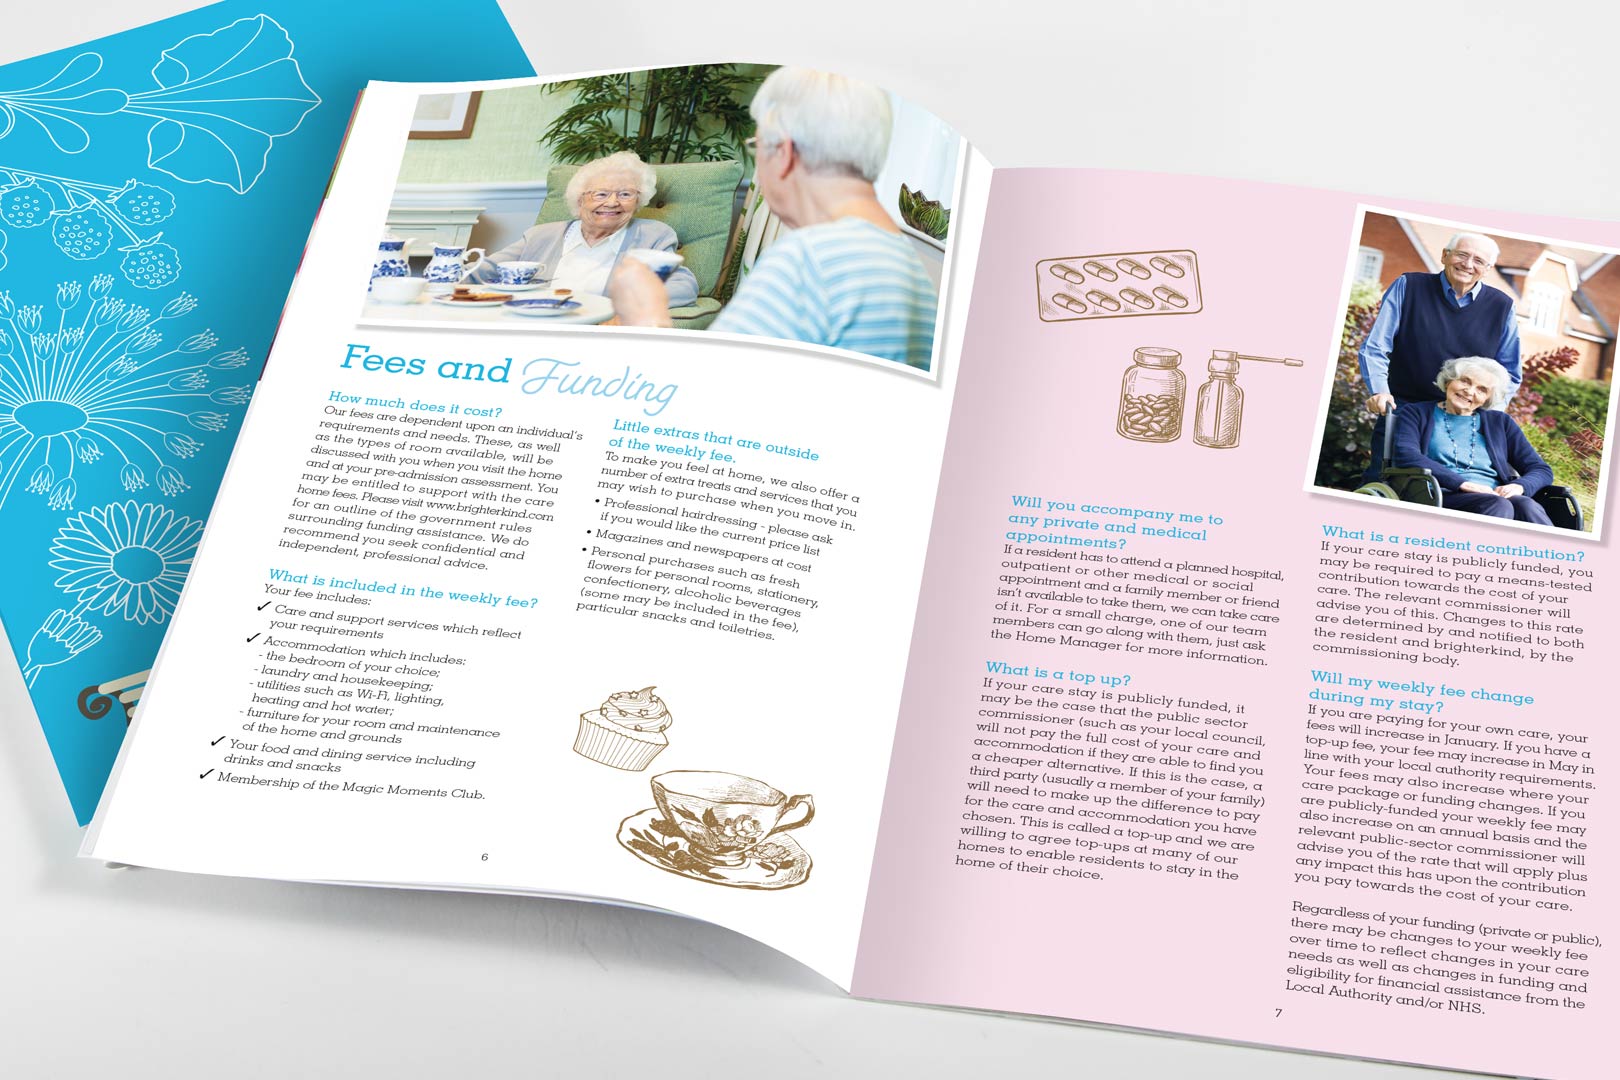 brighterkind FAQs brochure and Spread